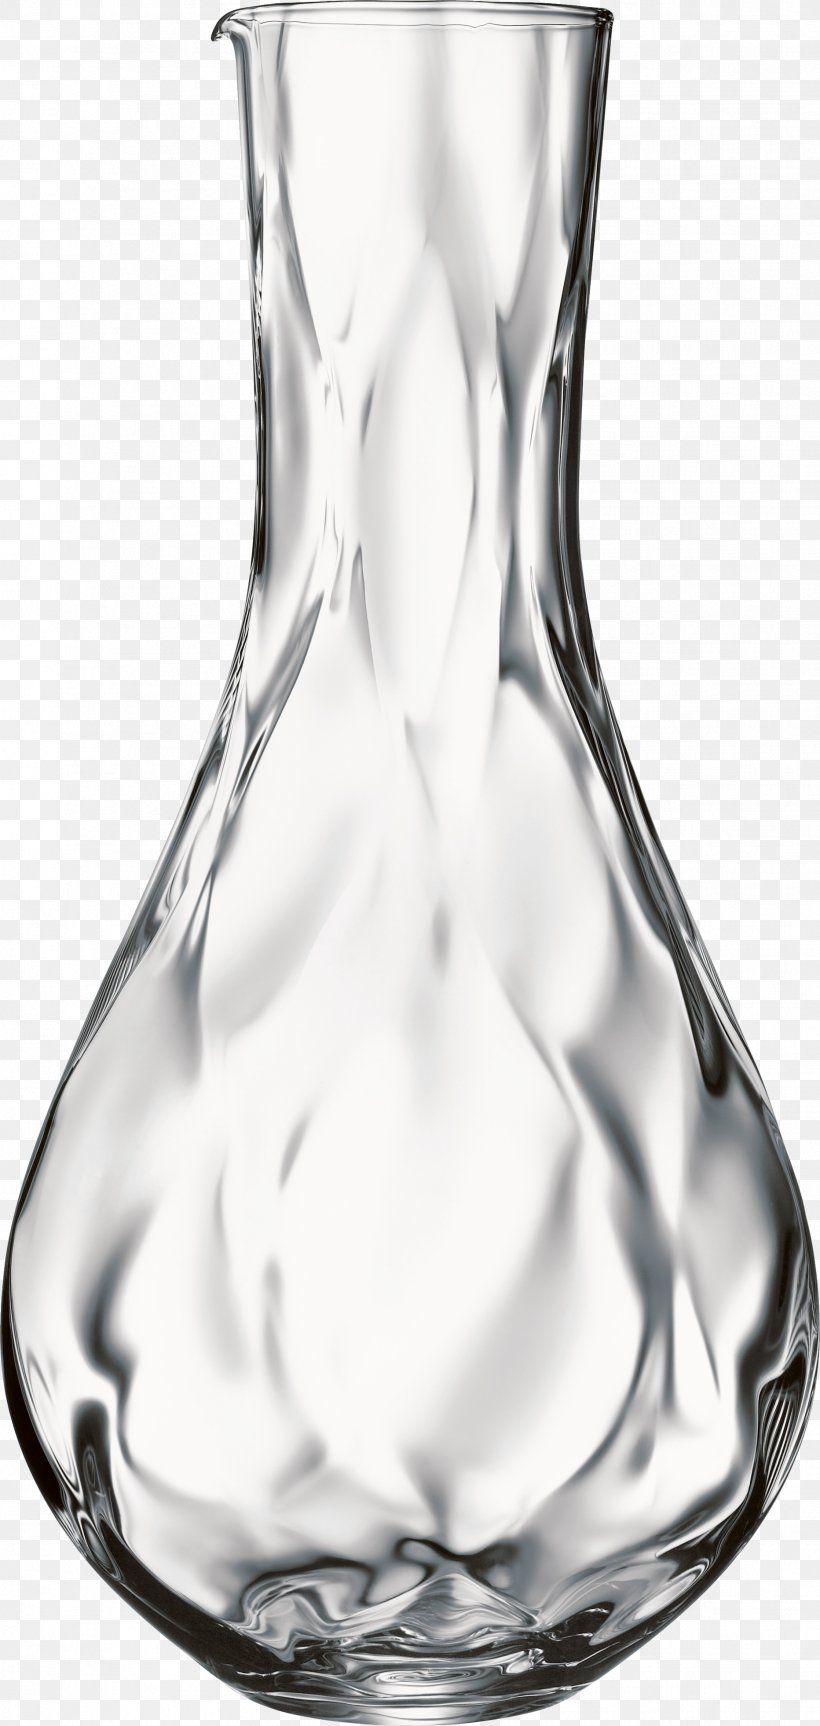 Vase Download Archive File, PNG, 1864x3925px, Vase, Archive File, Barware, Black And White, Bottle Download Free